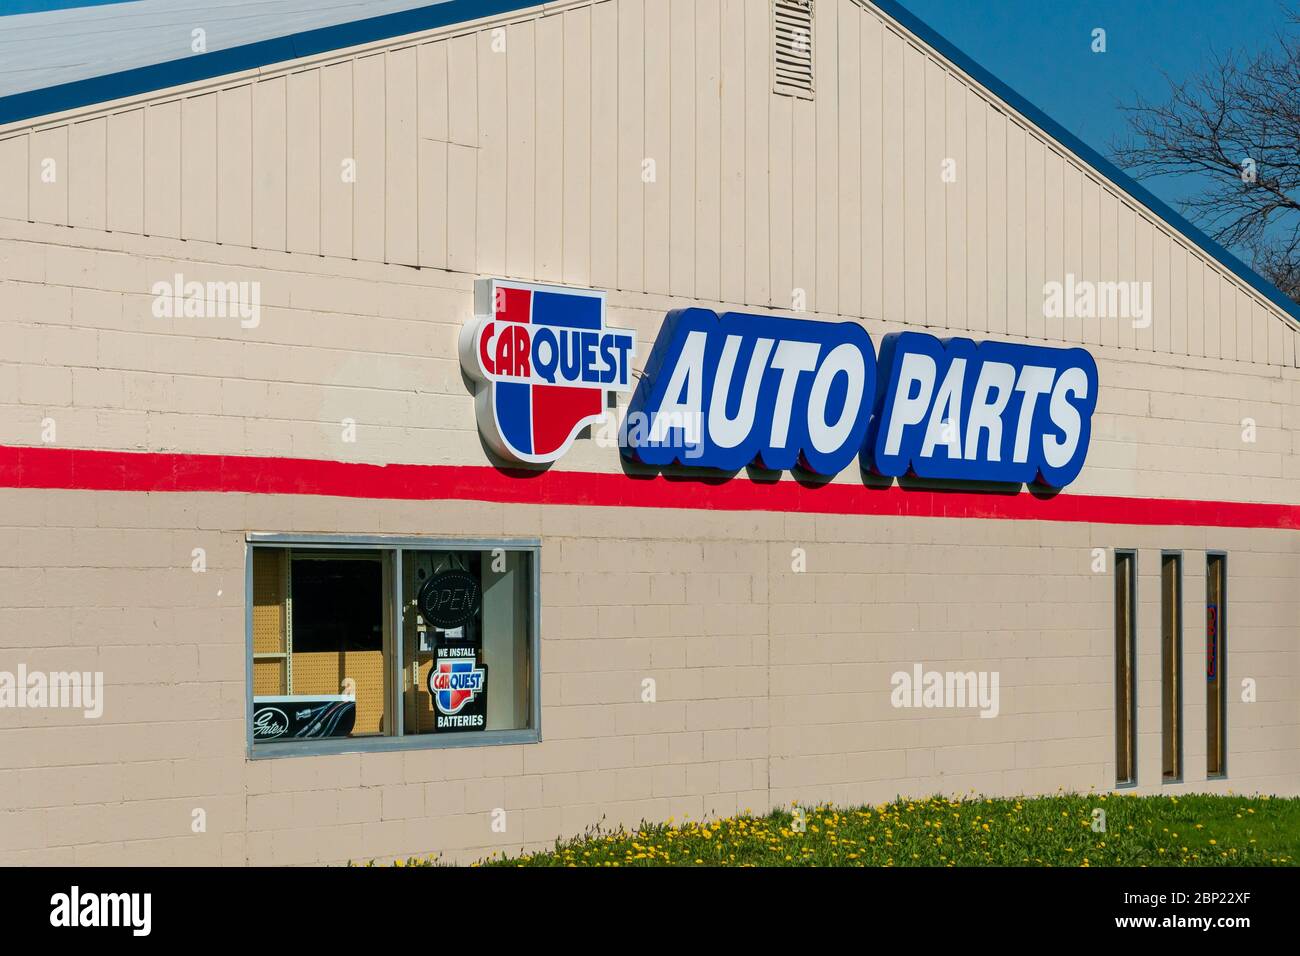 River Falls Wi Usa May 2 Carquest Auto Parts Store Exterior And Trademark Logo Stock Photo Alamy